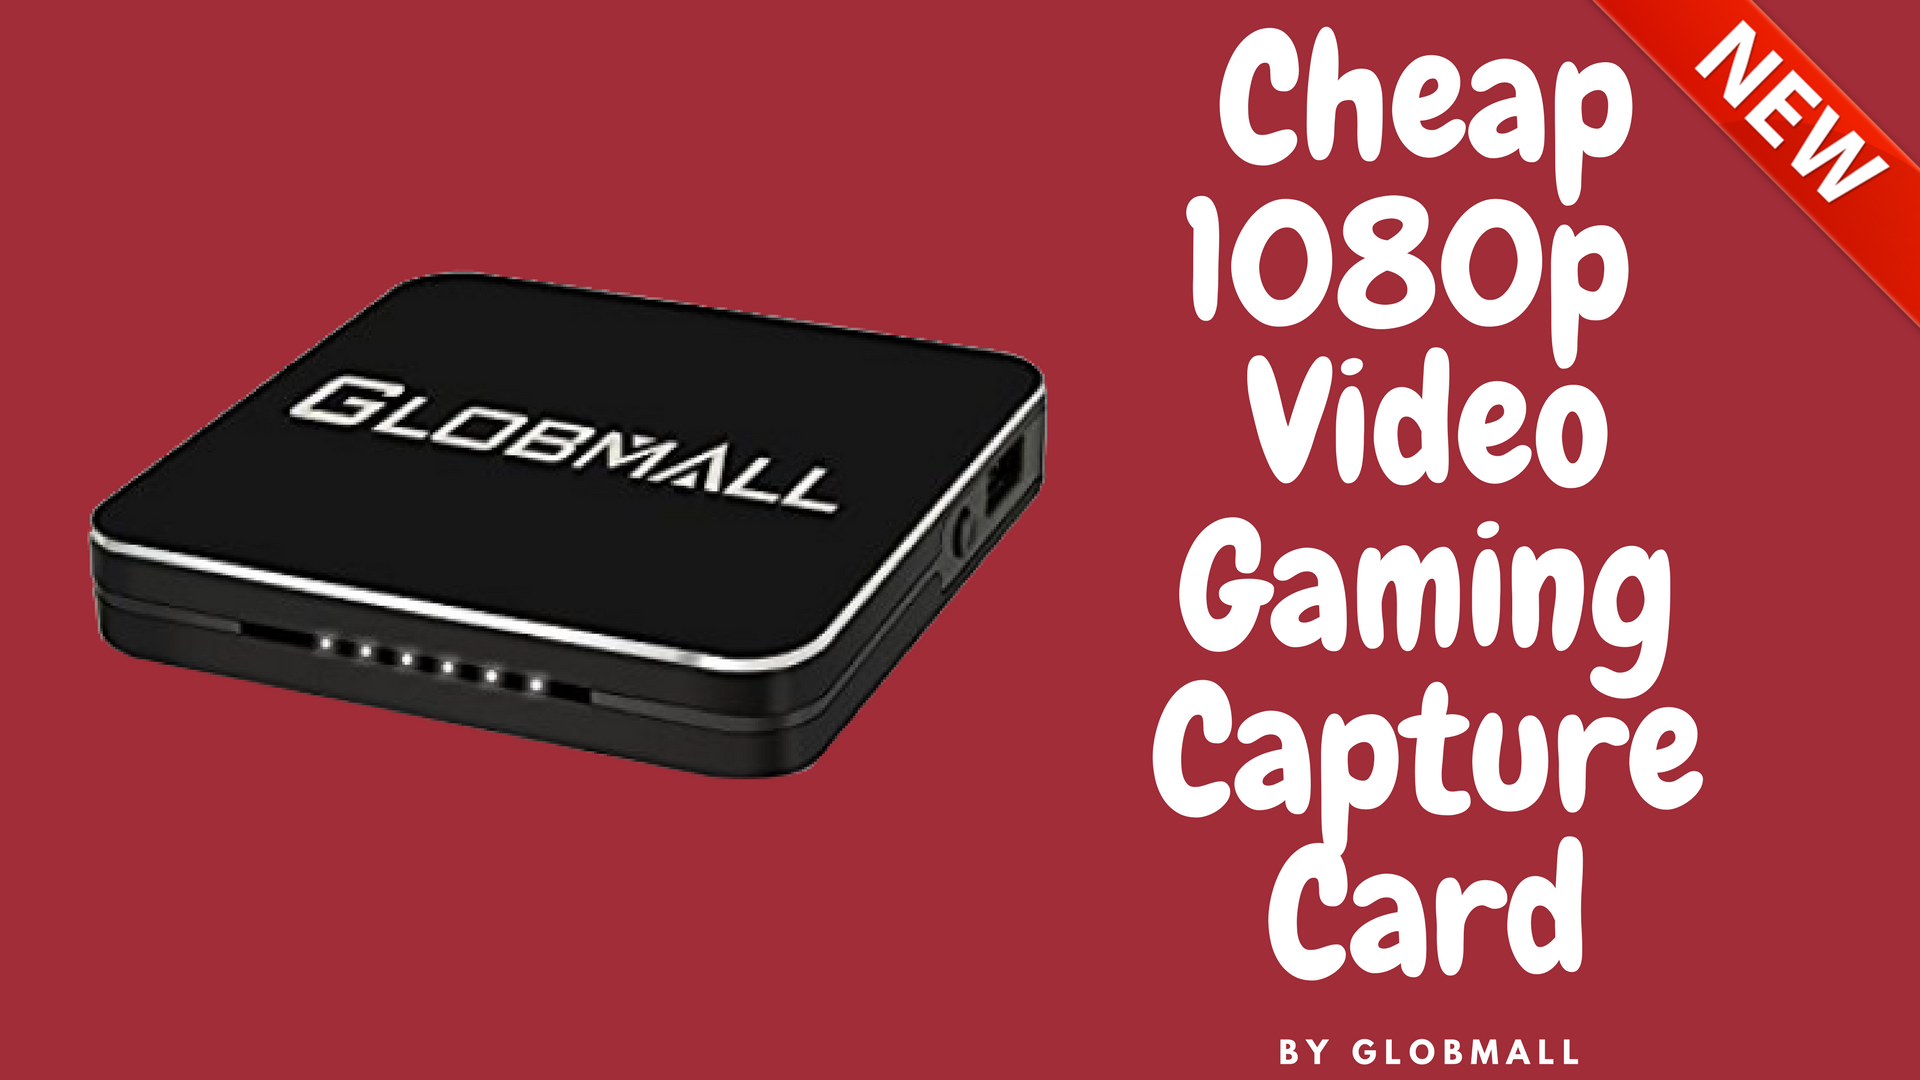 Cheap 1080p Video Gaming Capture Card